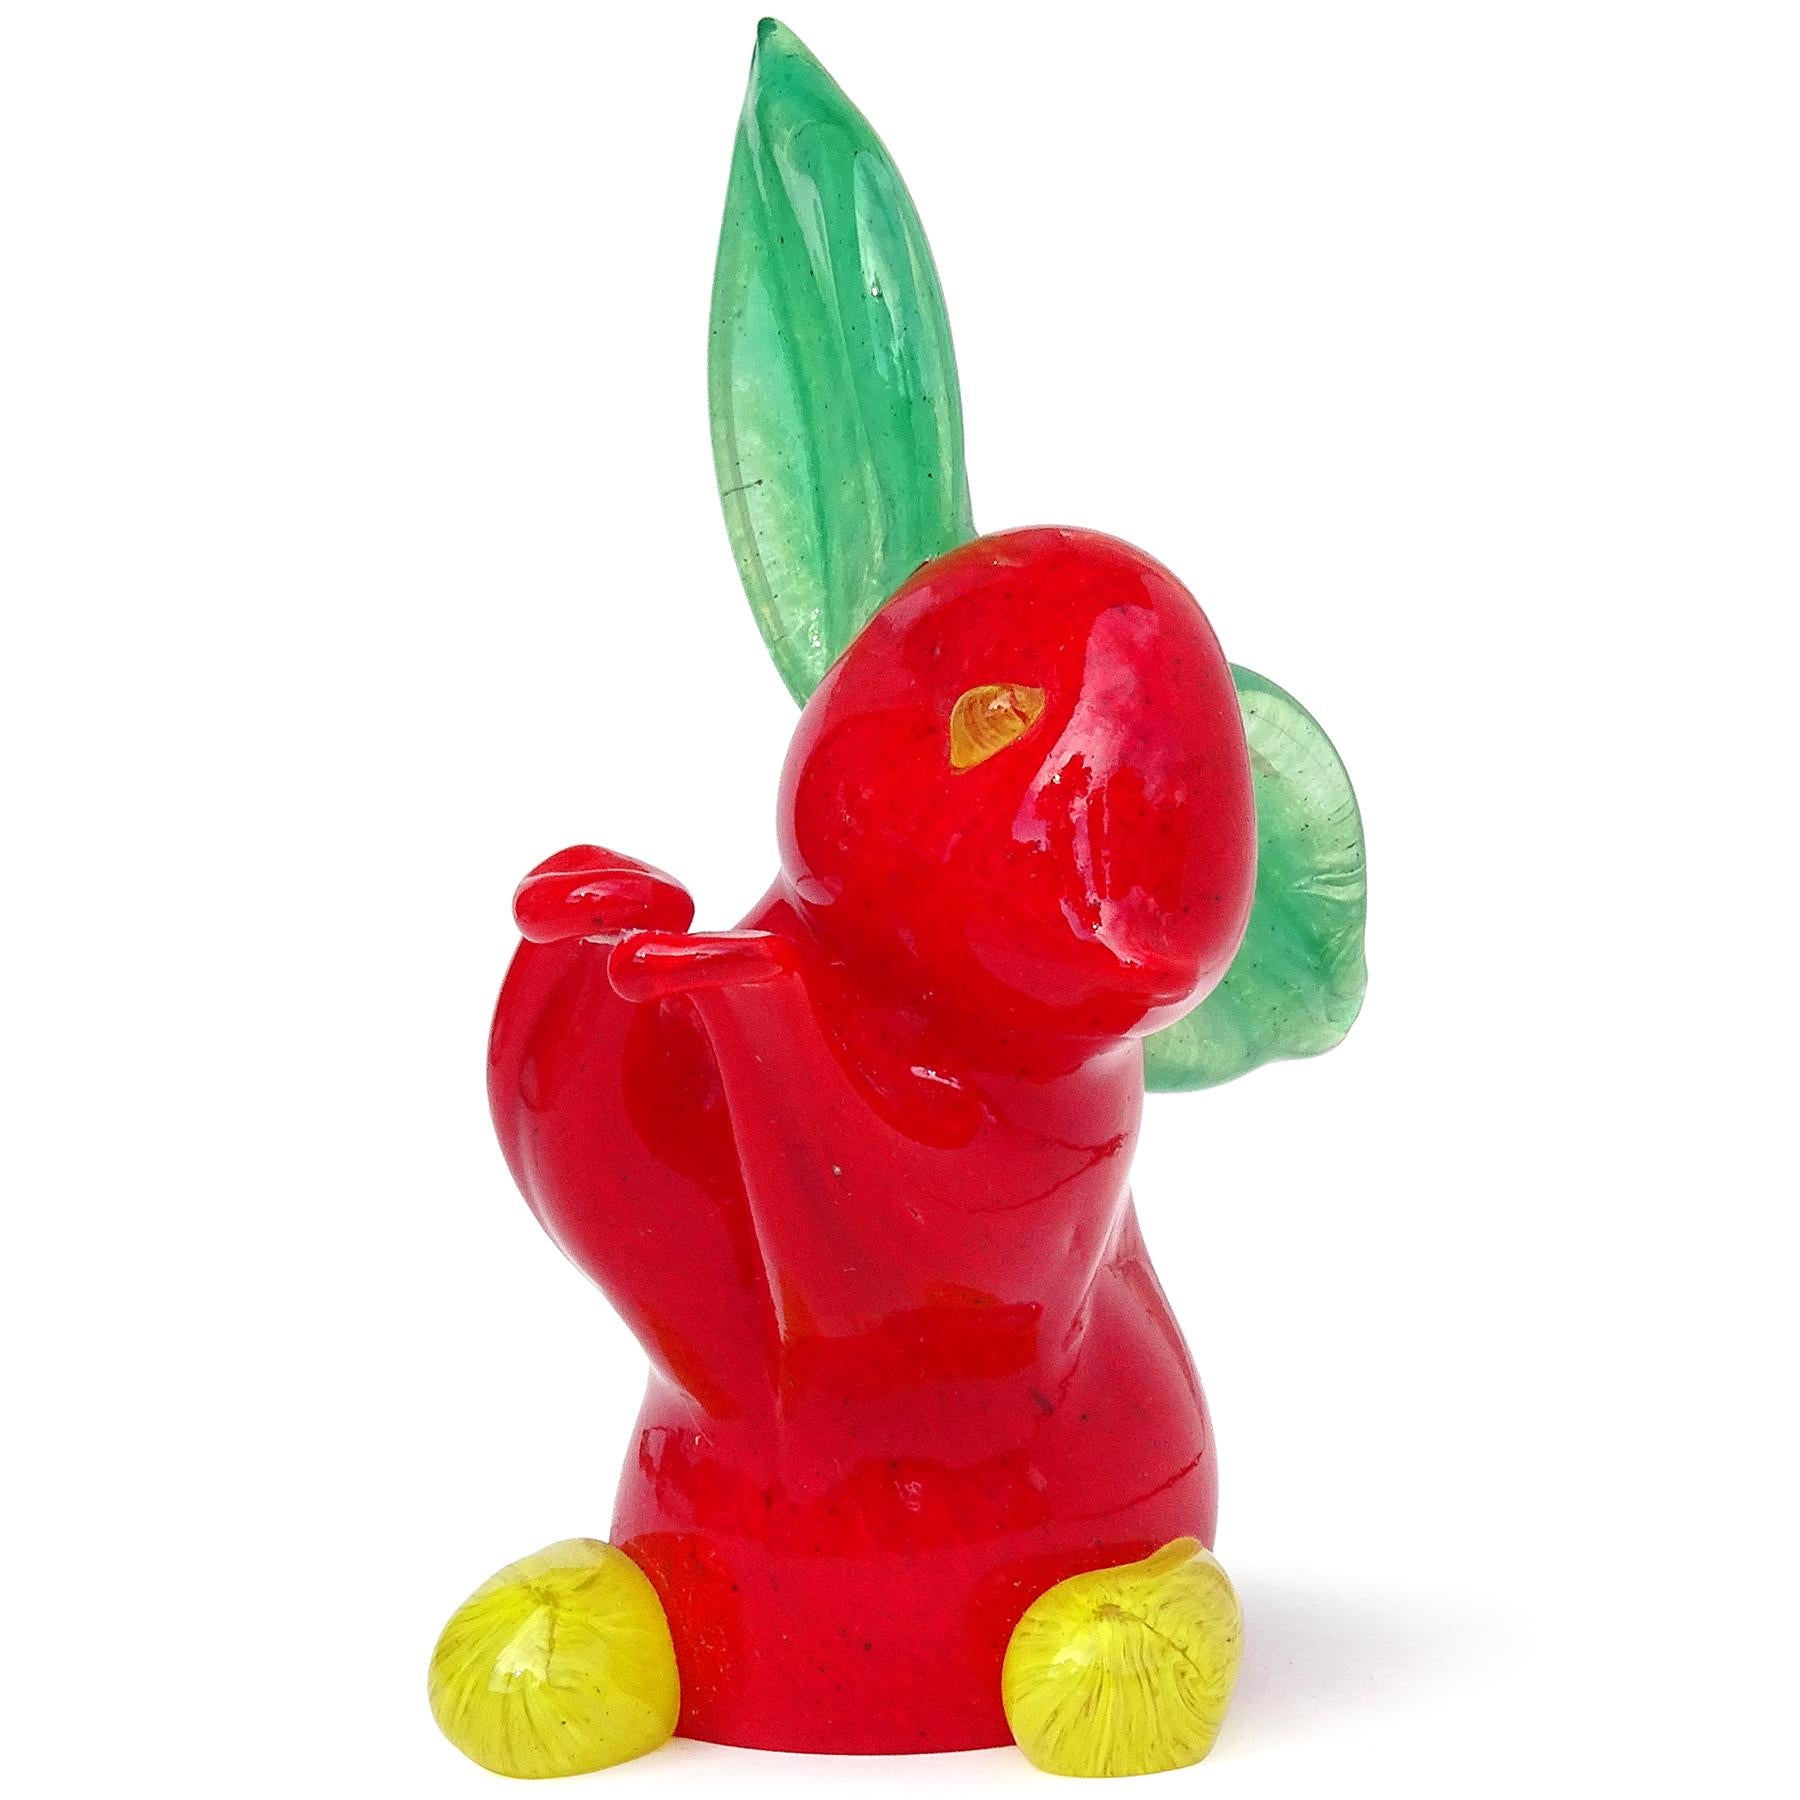 Beautiful vintage Murano hand red, green and yellow Italian art glass bunny rabbit figurine / sculpture. The piece is documented to the Gambaro & Poggi company. It is missing the original 